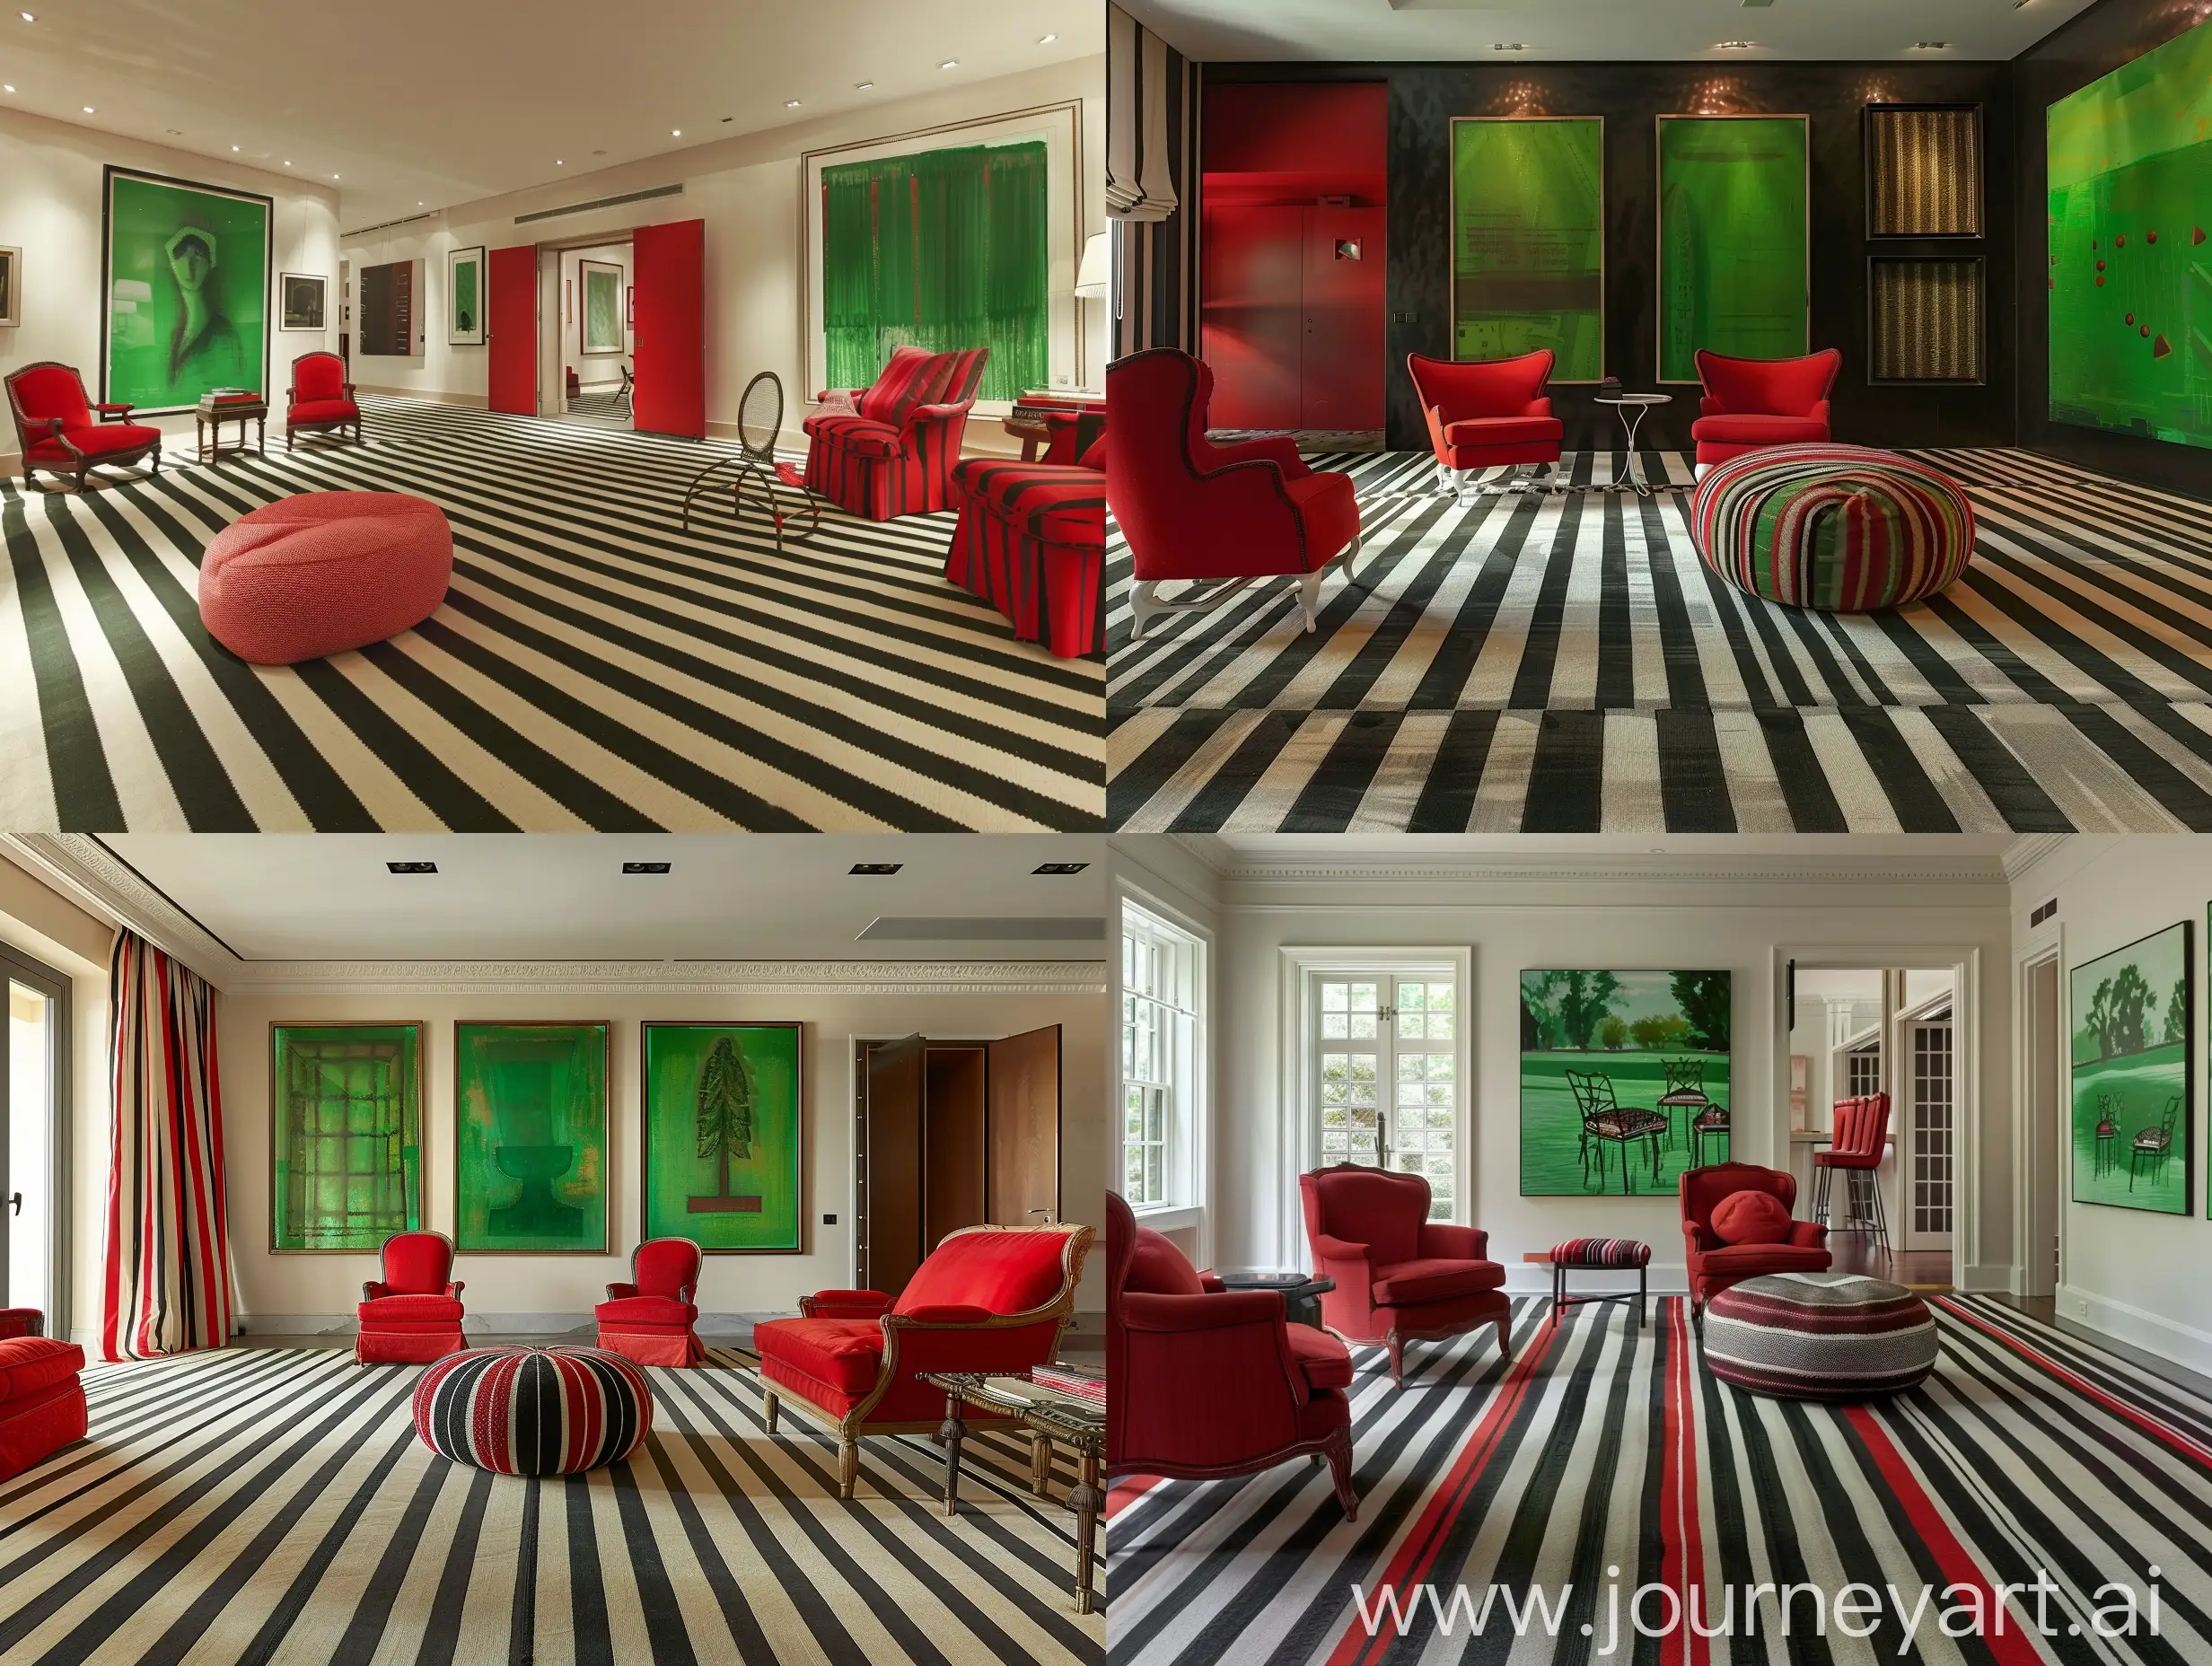 Striped carpet and pouf in the interior of a spacious living room with red chairs and green paintings